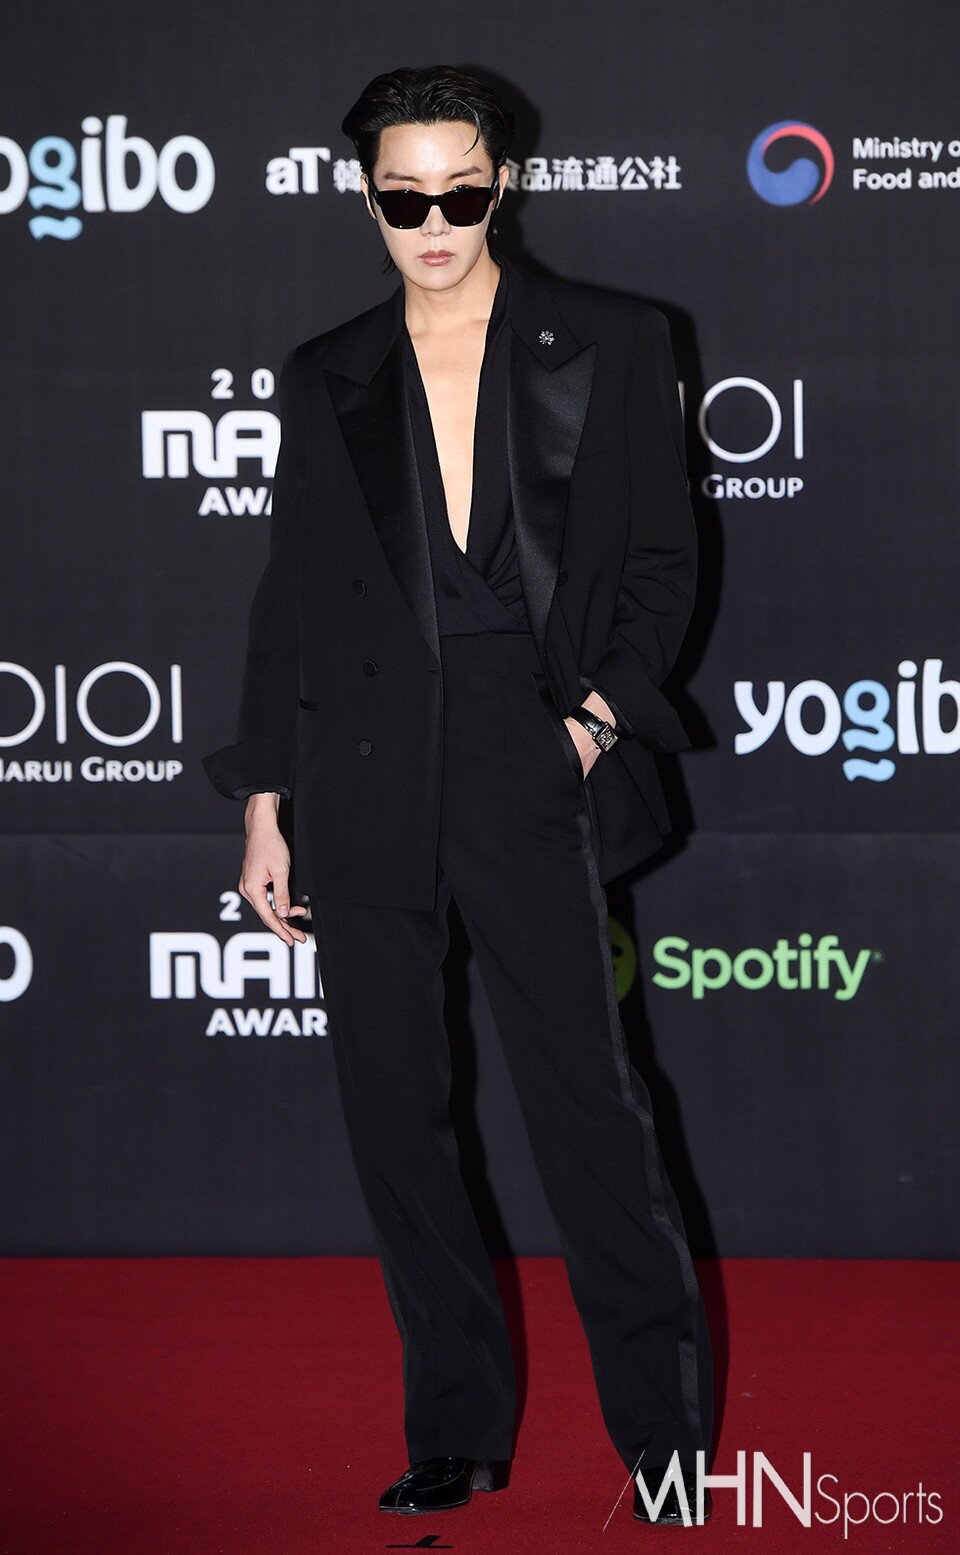 BTS J-Hope Put On A Showstopping Look At The 2022 MAMA Awards Red Carpet